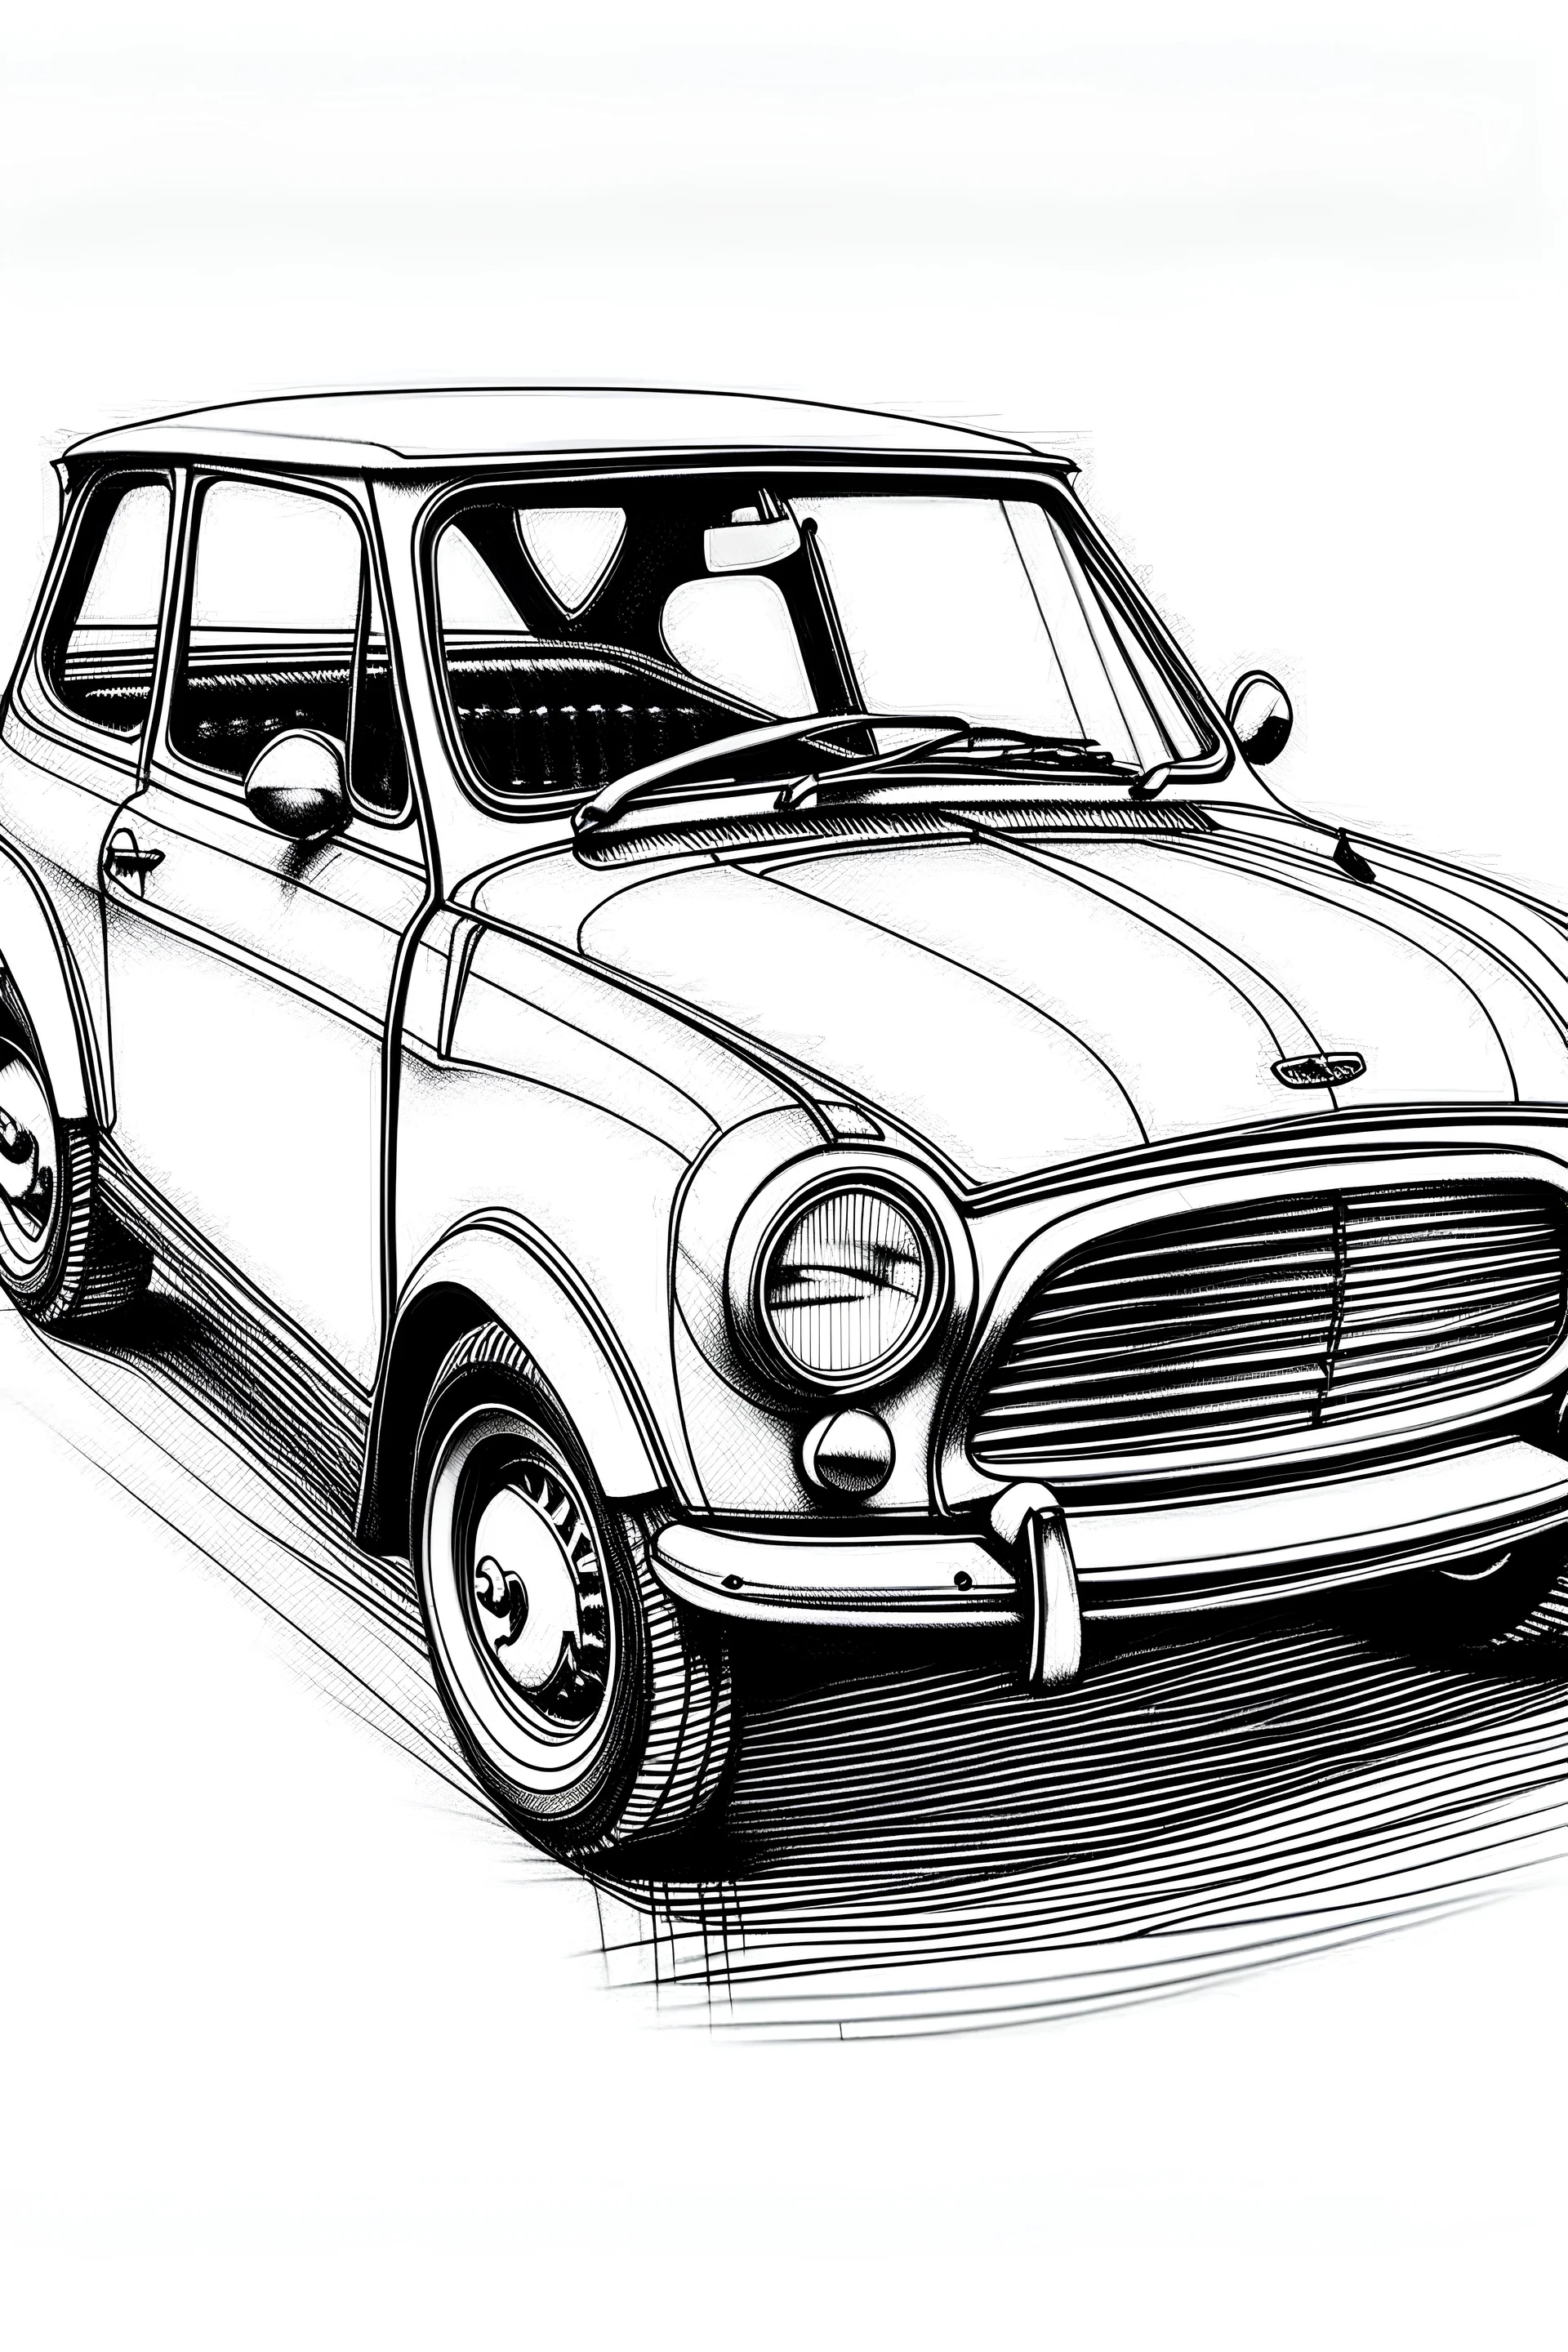 Small Car Humorous Illustration Sketch Continuous Line Drawing Vector  Illustration Stock Illustration - Download Image Now - iStock